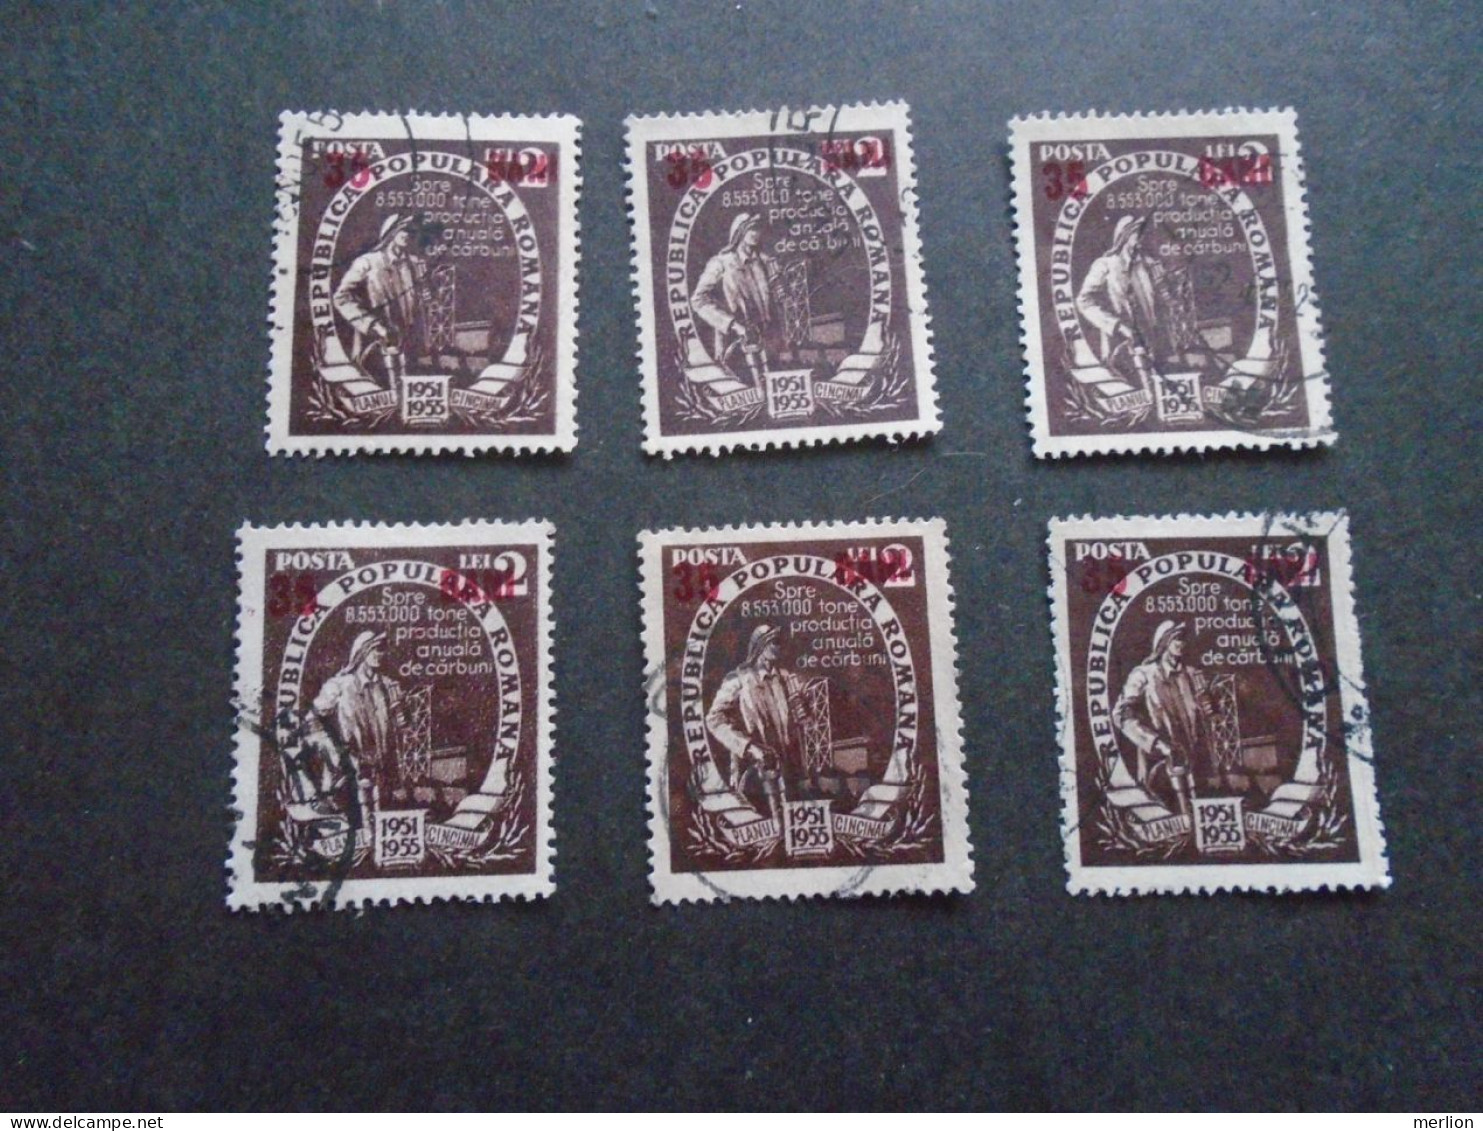 D202265   Romania  1955  - 6 Pcs Of Used Stamps  1354Y - Gebraucht